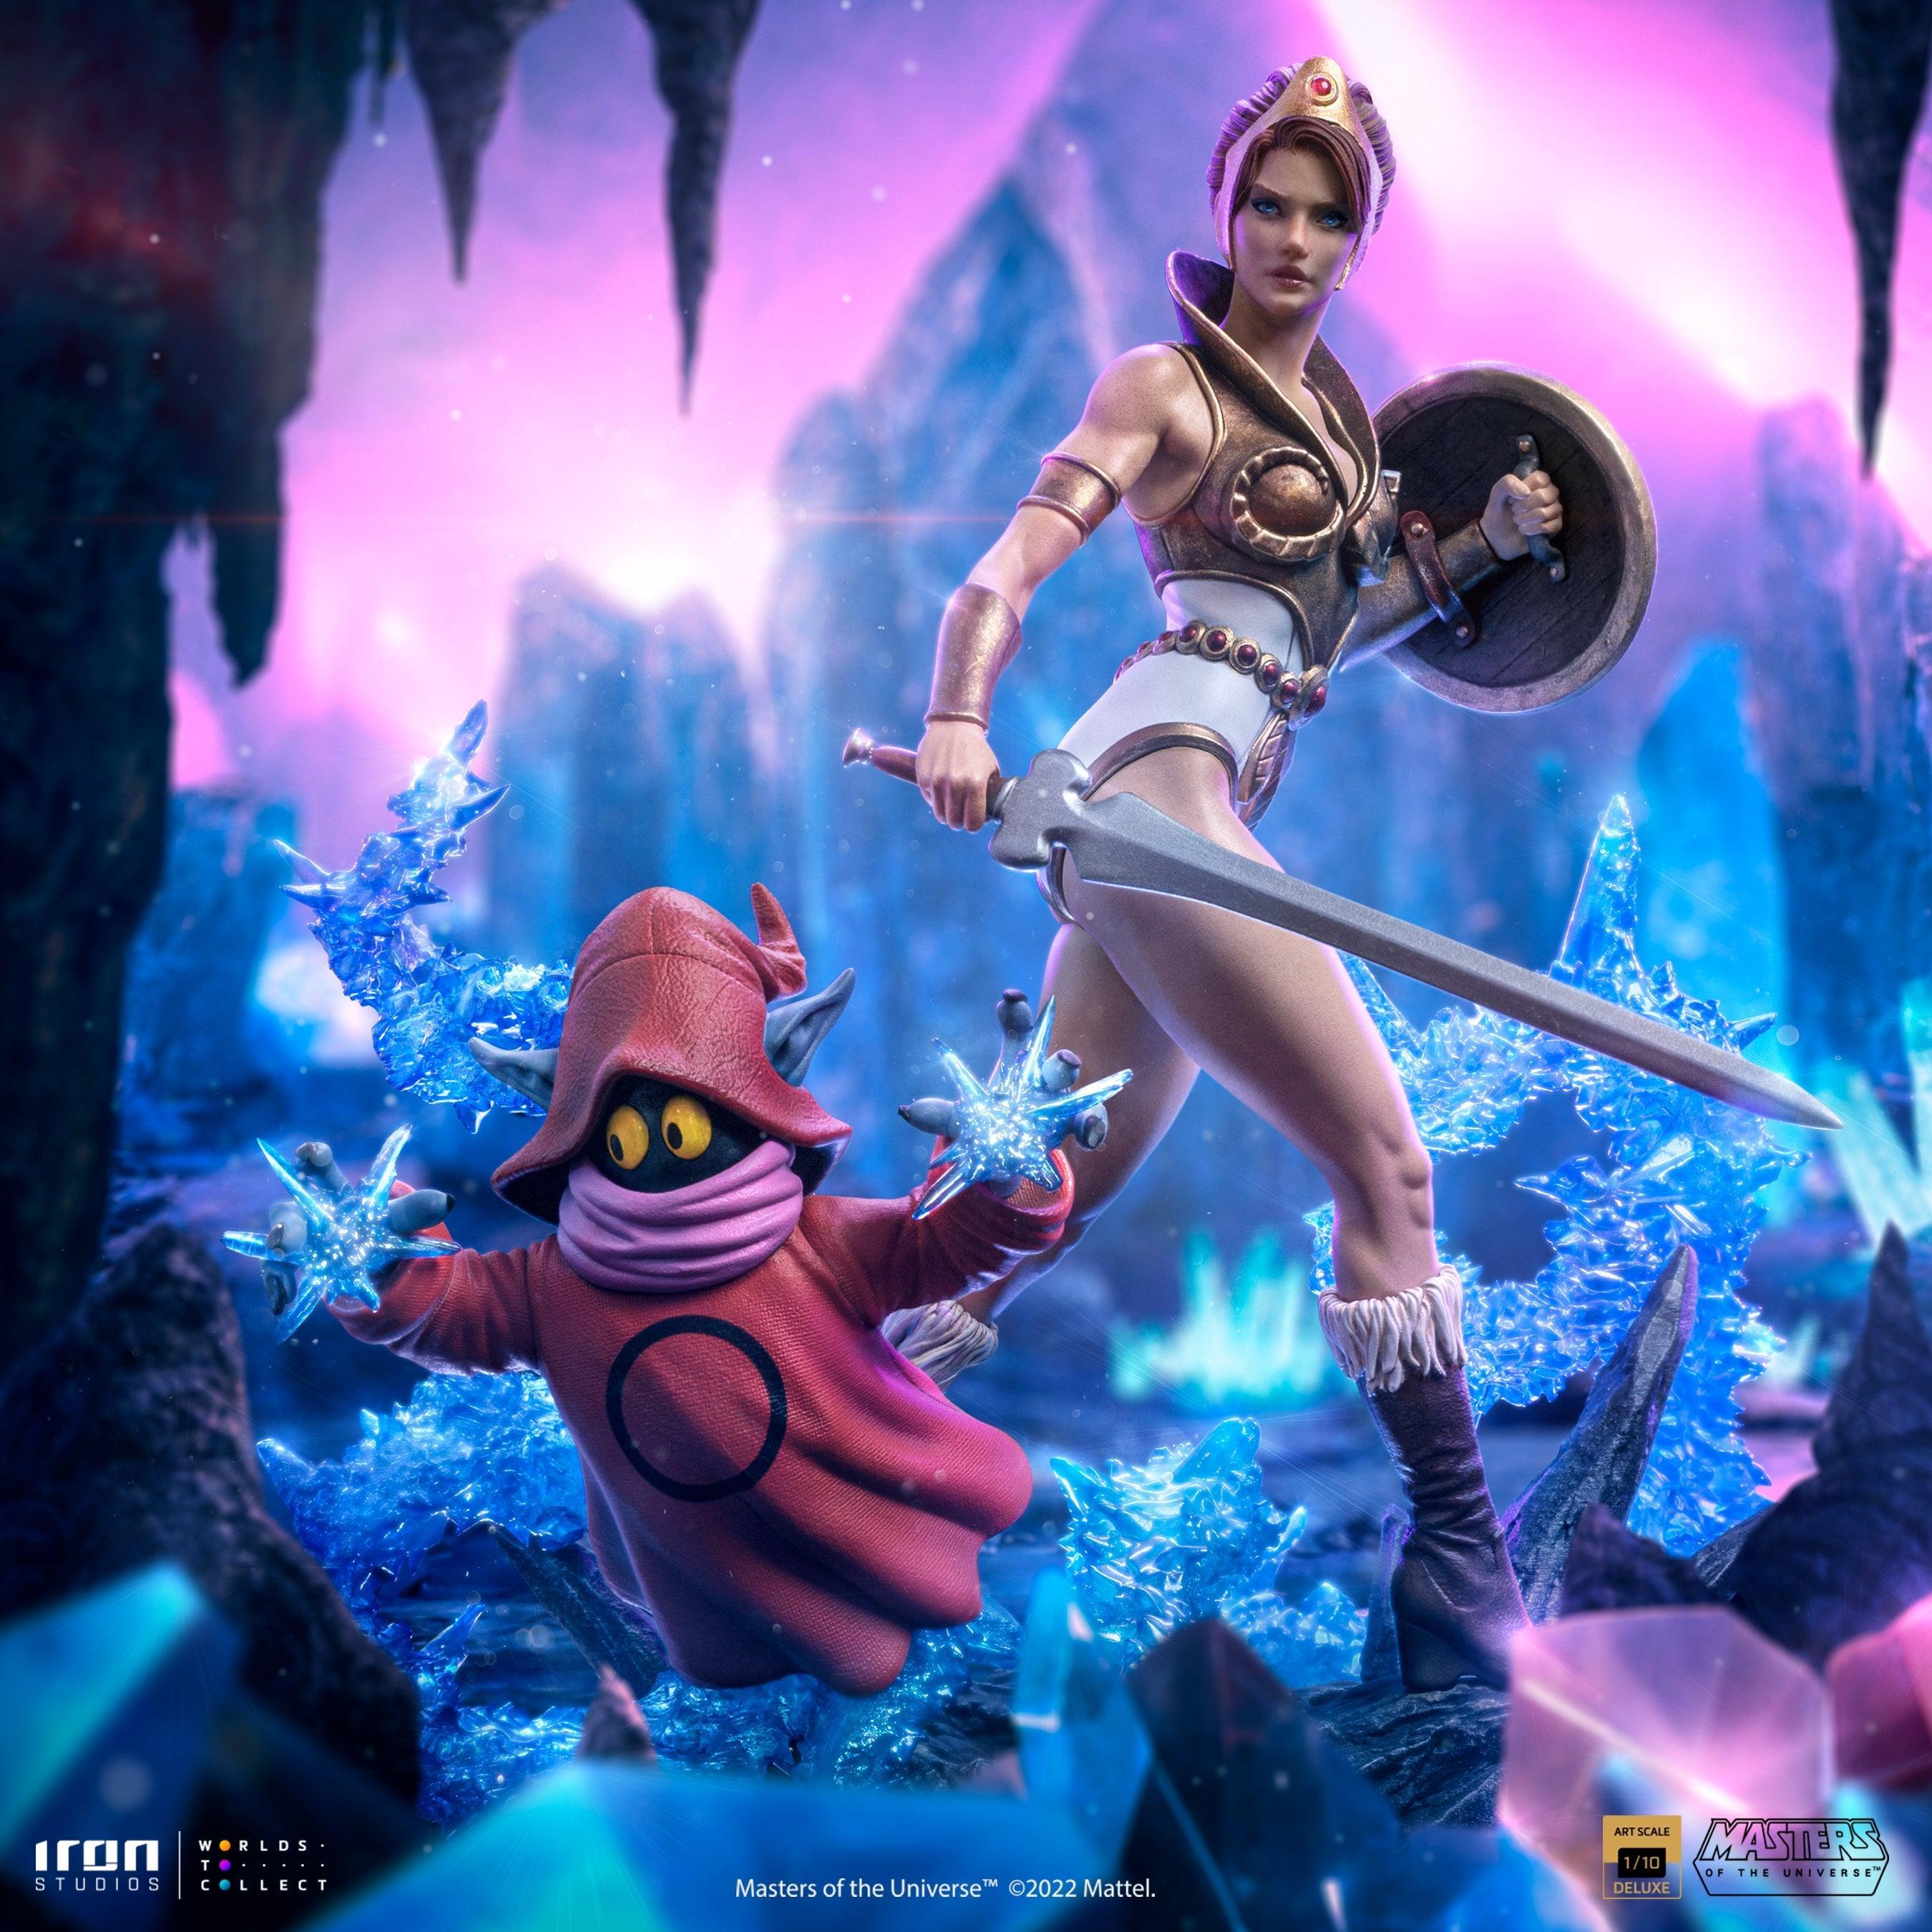 Iron Studios - Masters of the Universe - Teela & Orko Deluxe BDS Art Scale Statue 1/10 - The Card Vault